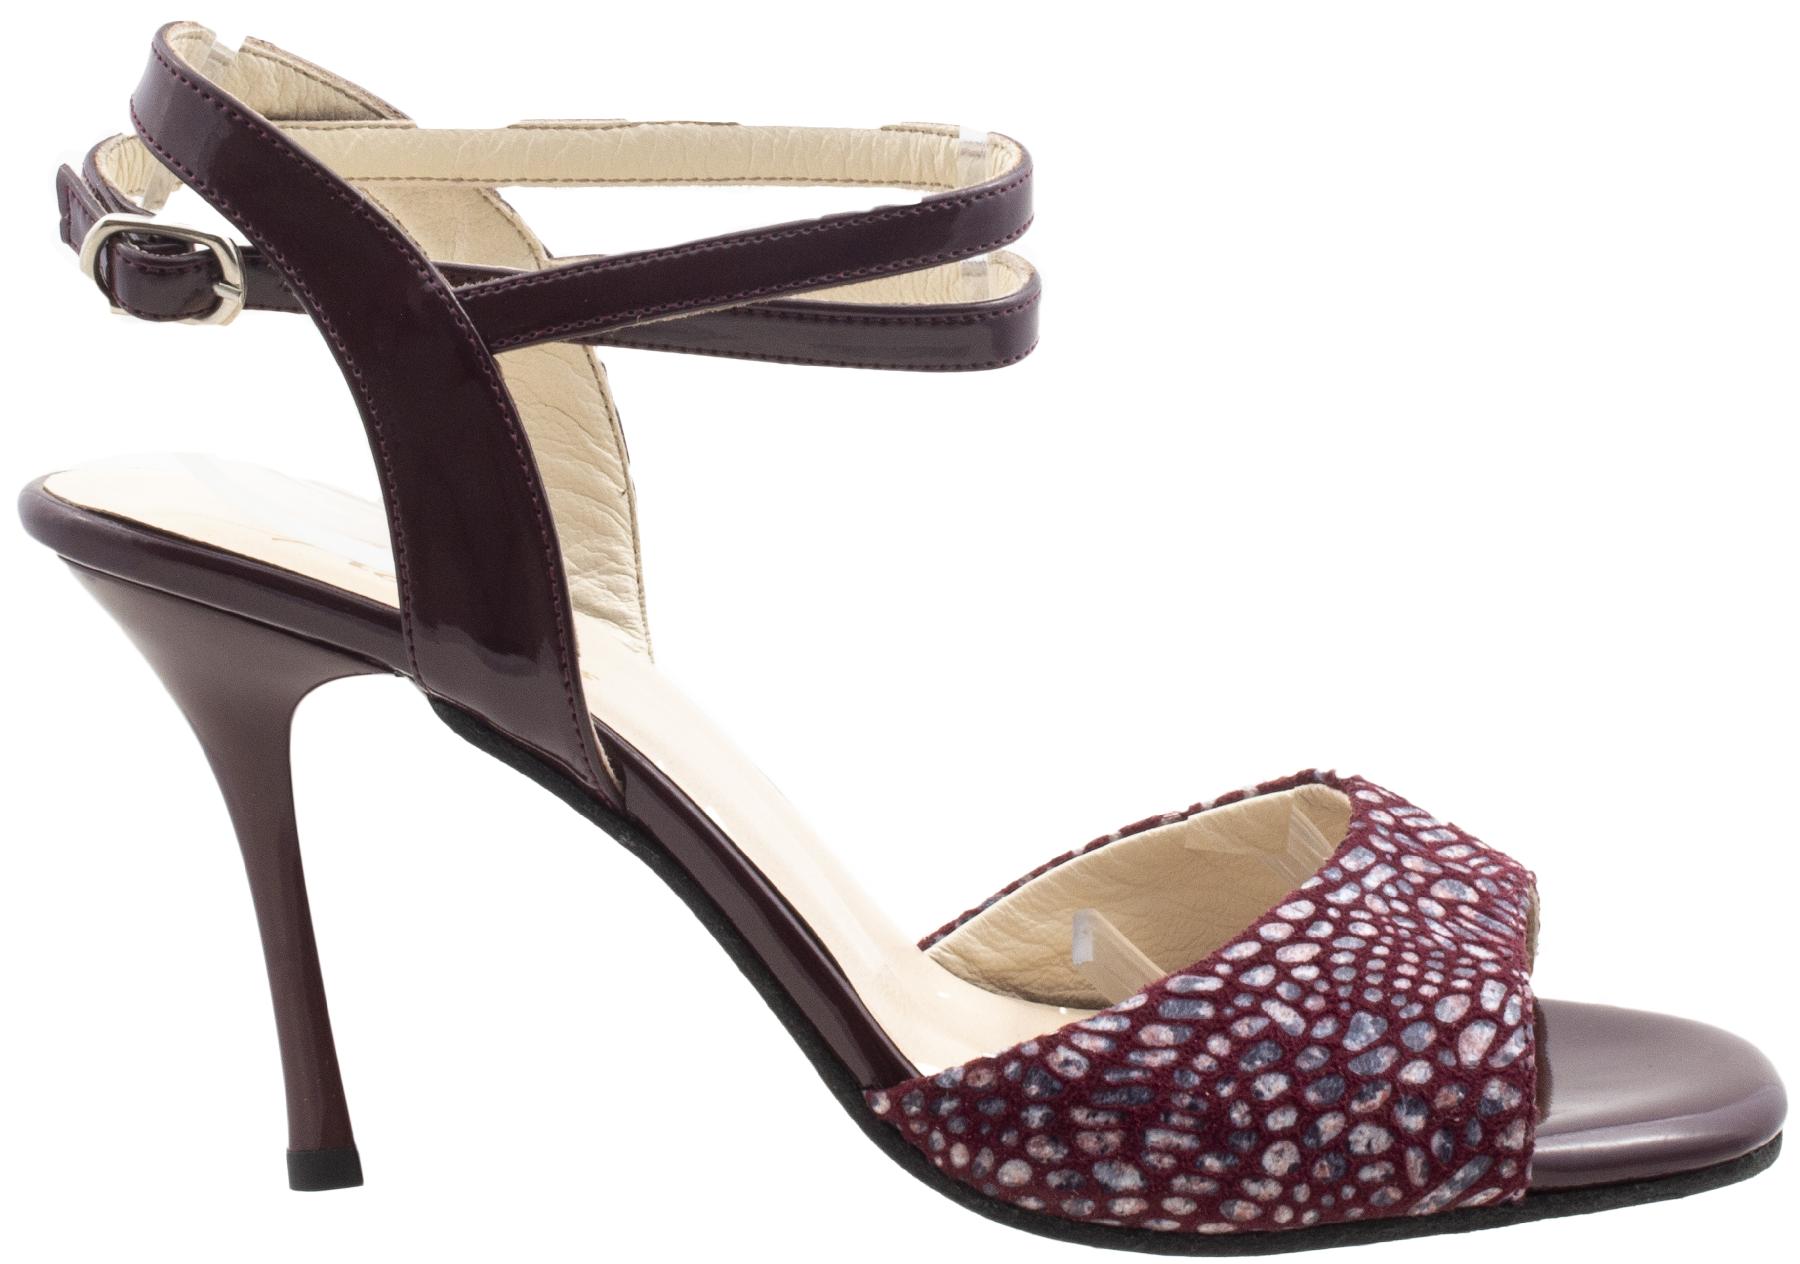 Tango Shoes- Maroon Tiles with Free Ankle